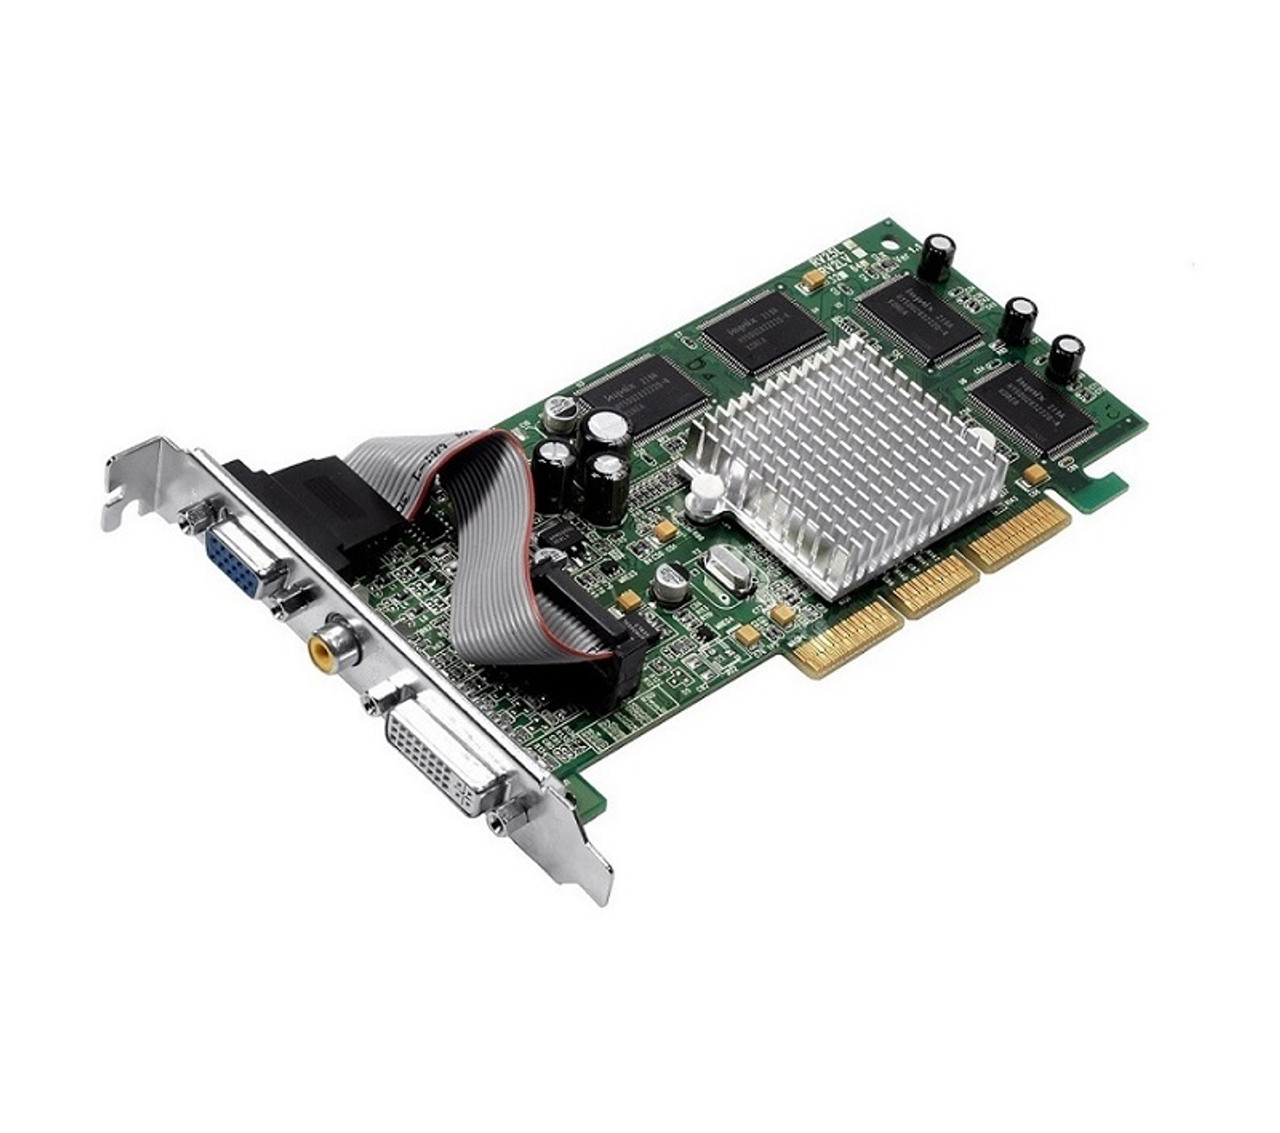 WR907AV - HP Nvidia GT210 PCI-Express X16 512MB Low Profile Video Graphics Card